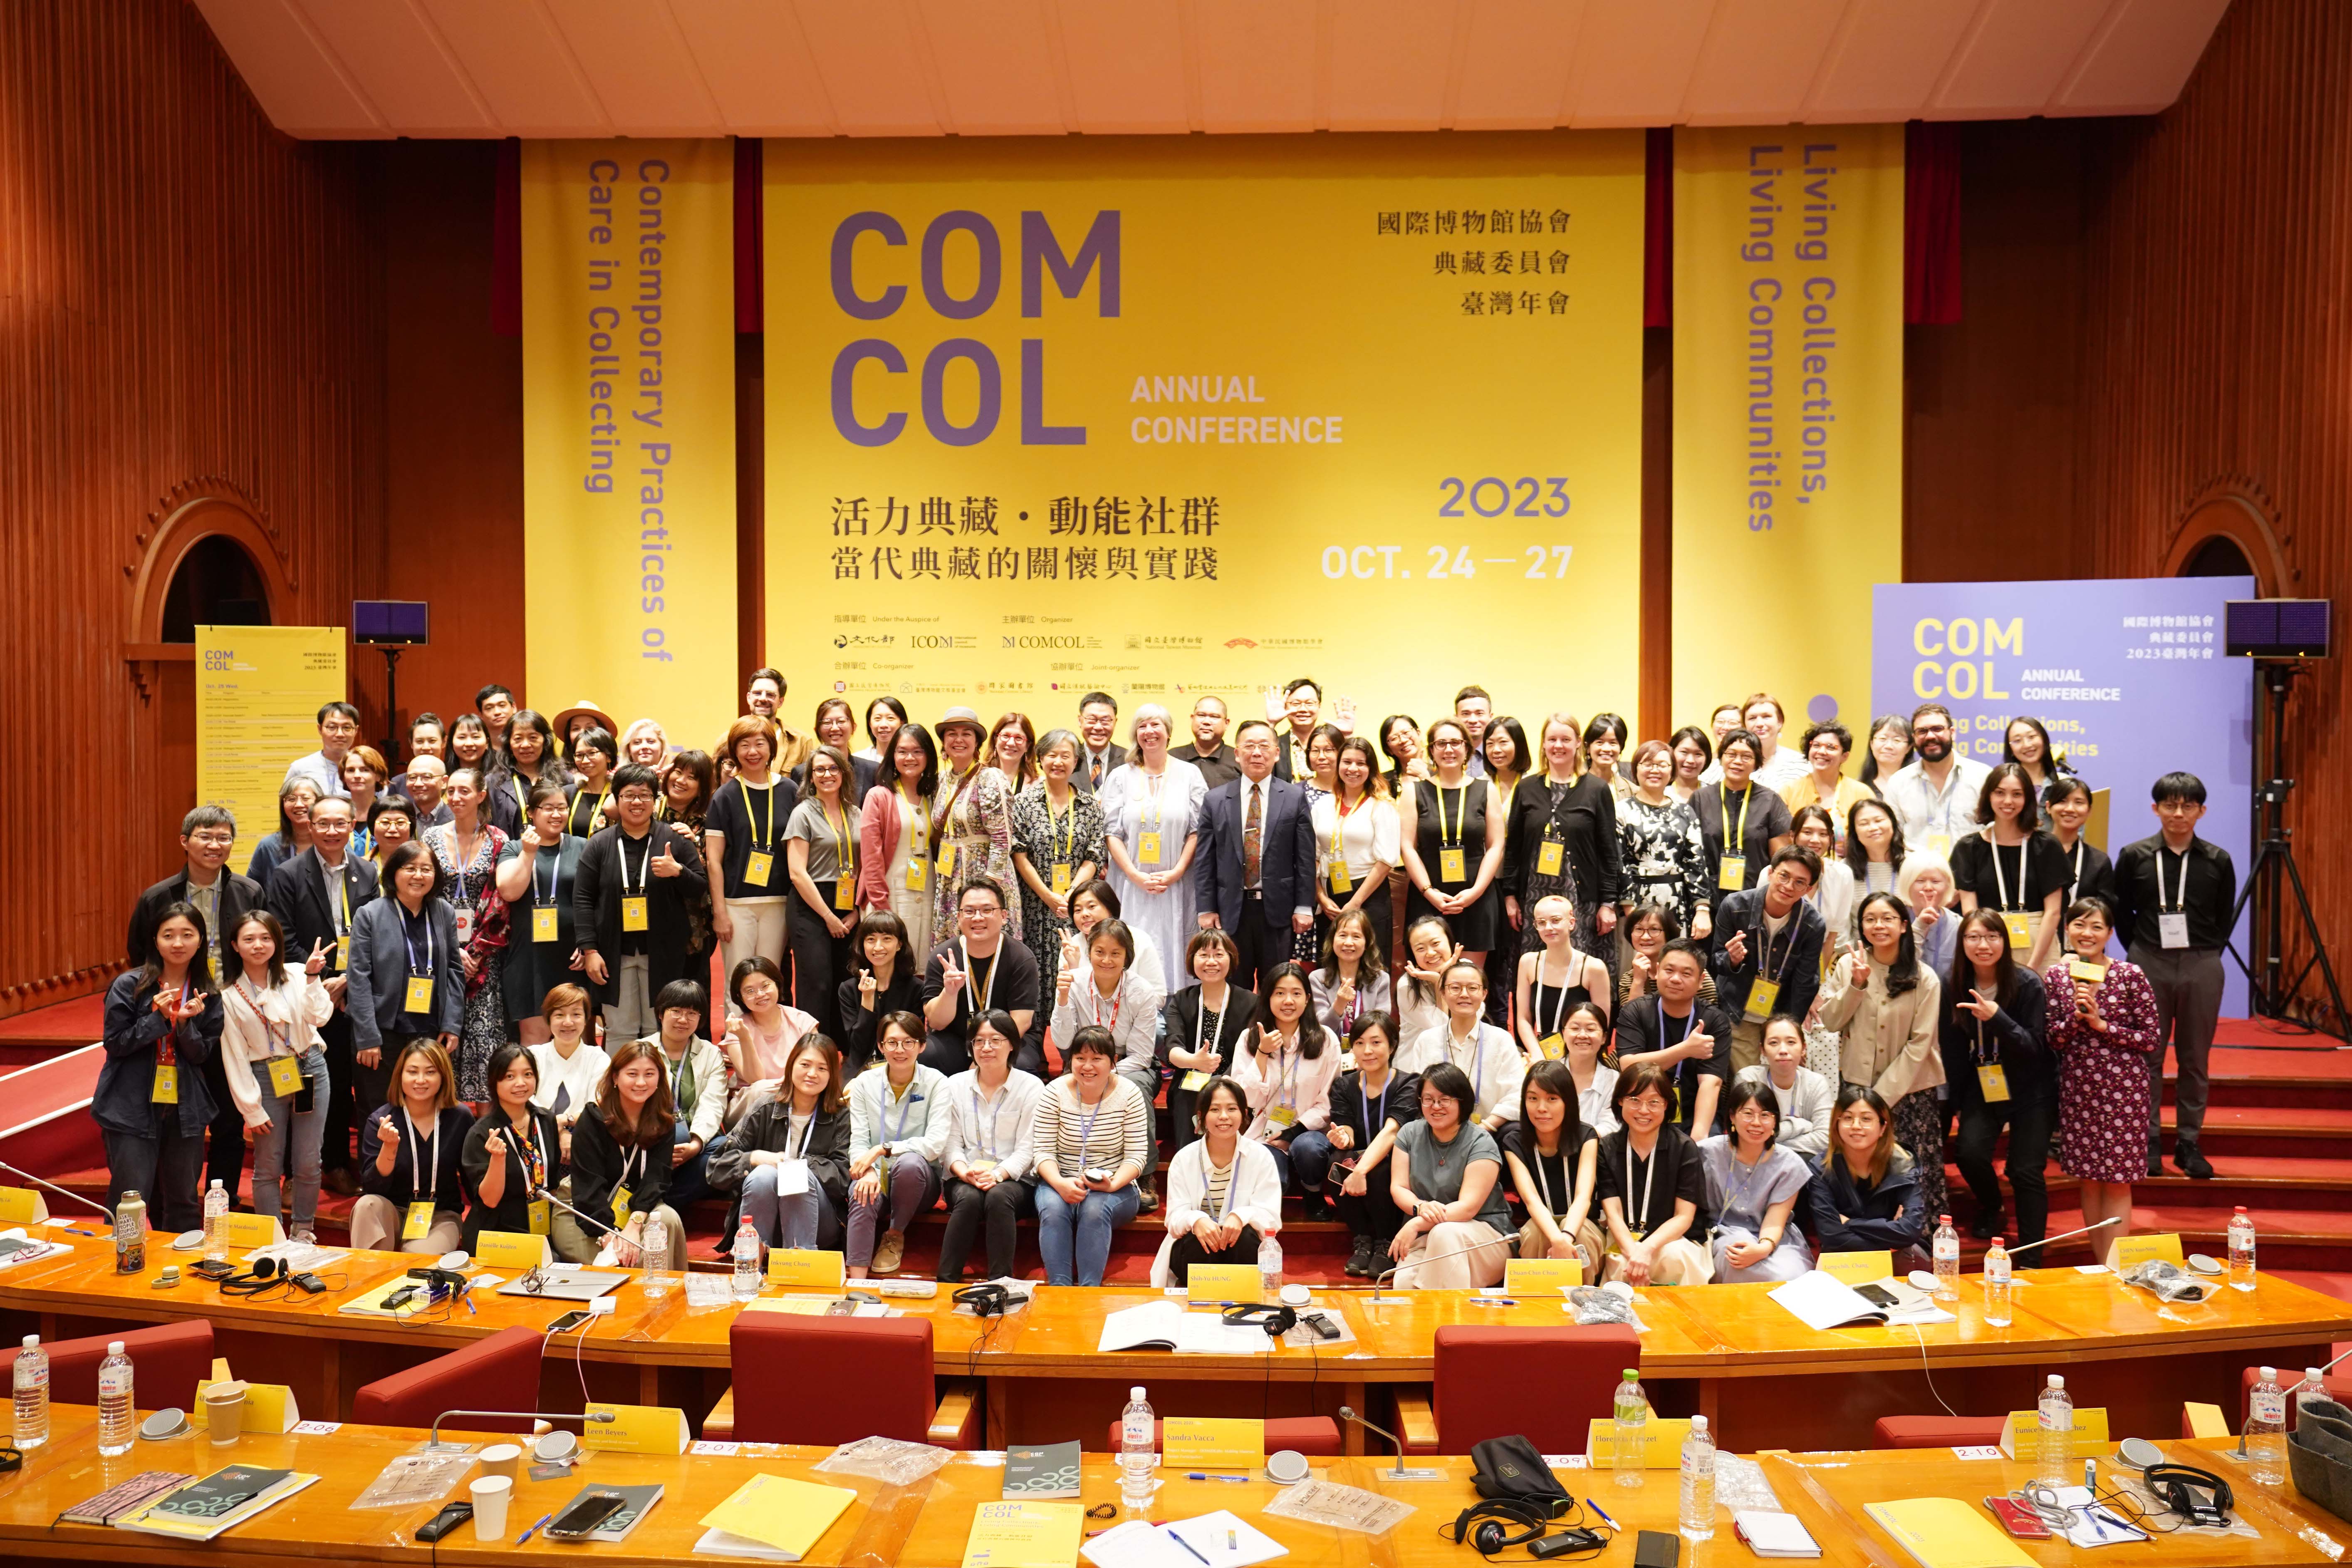 ICOM COMCOL 2023 Taiwan Annual Conference concludes